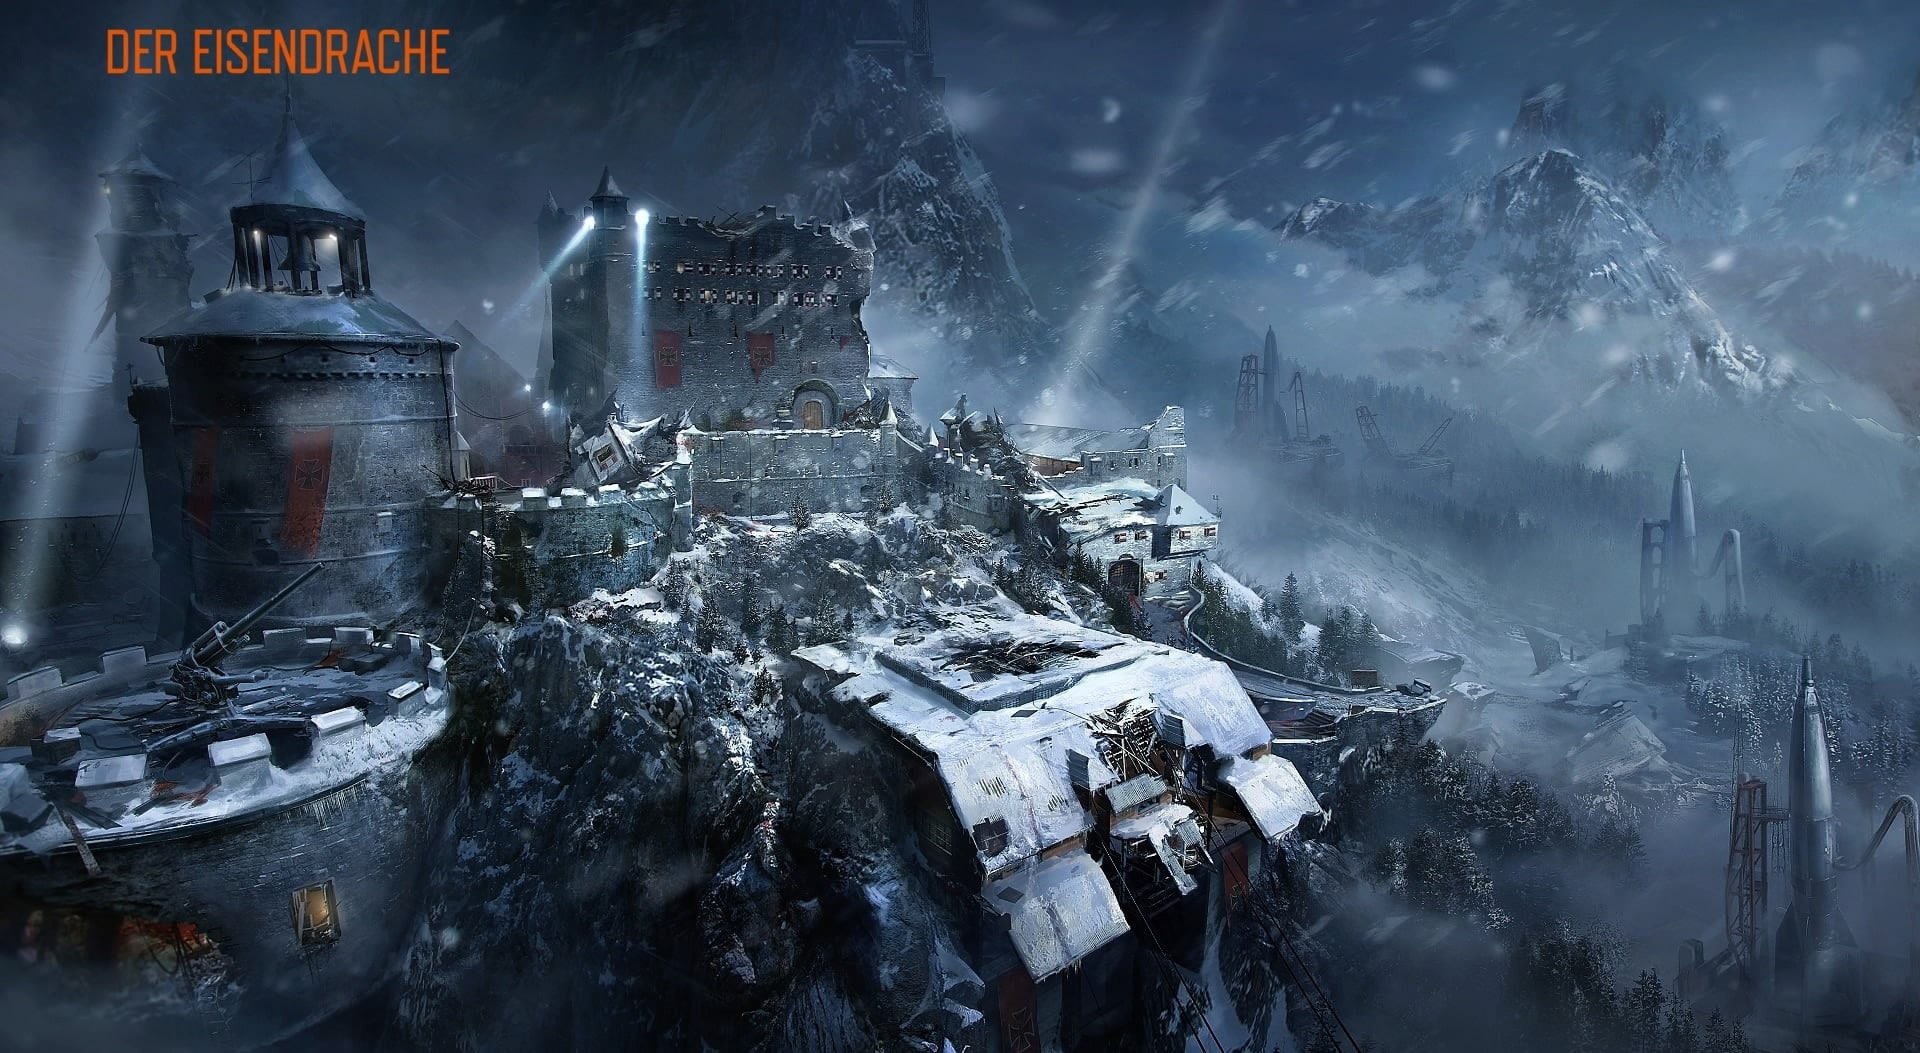 Black Ops 3 Zombies Der Eisendrache, wrecked castle, Games, Call Of Duty